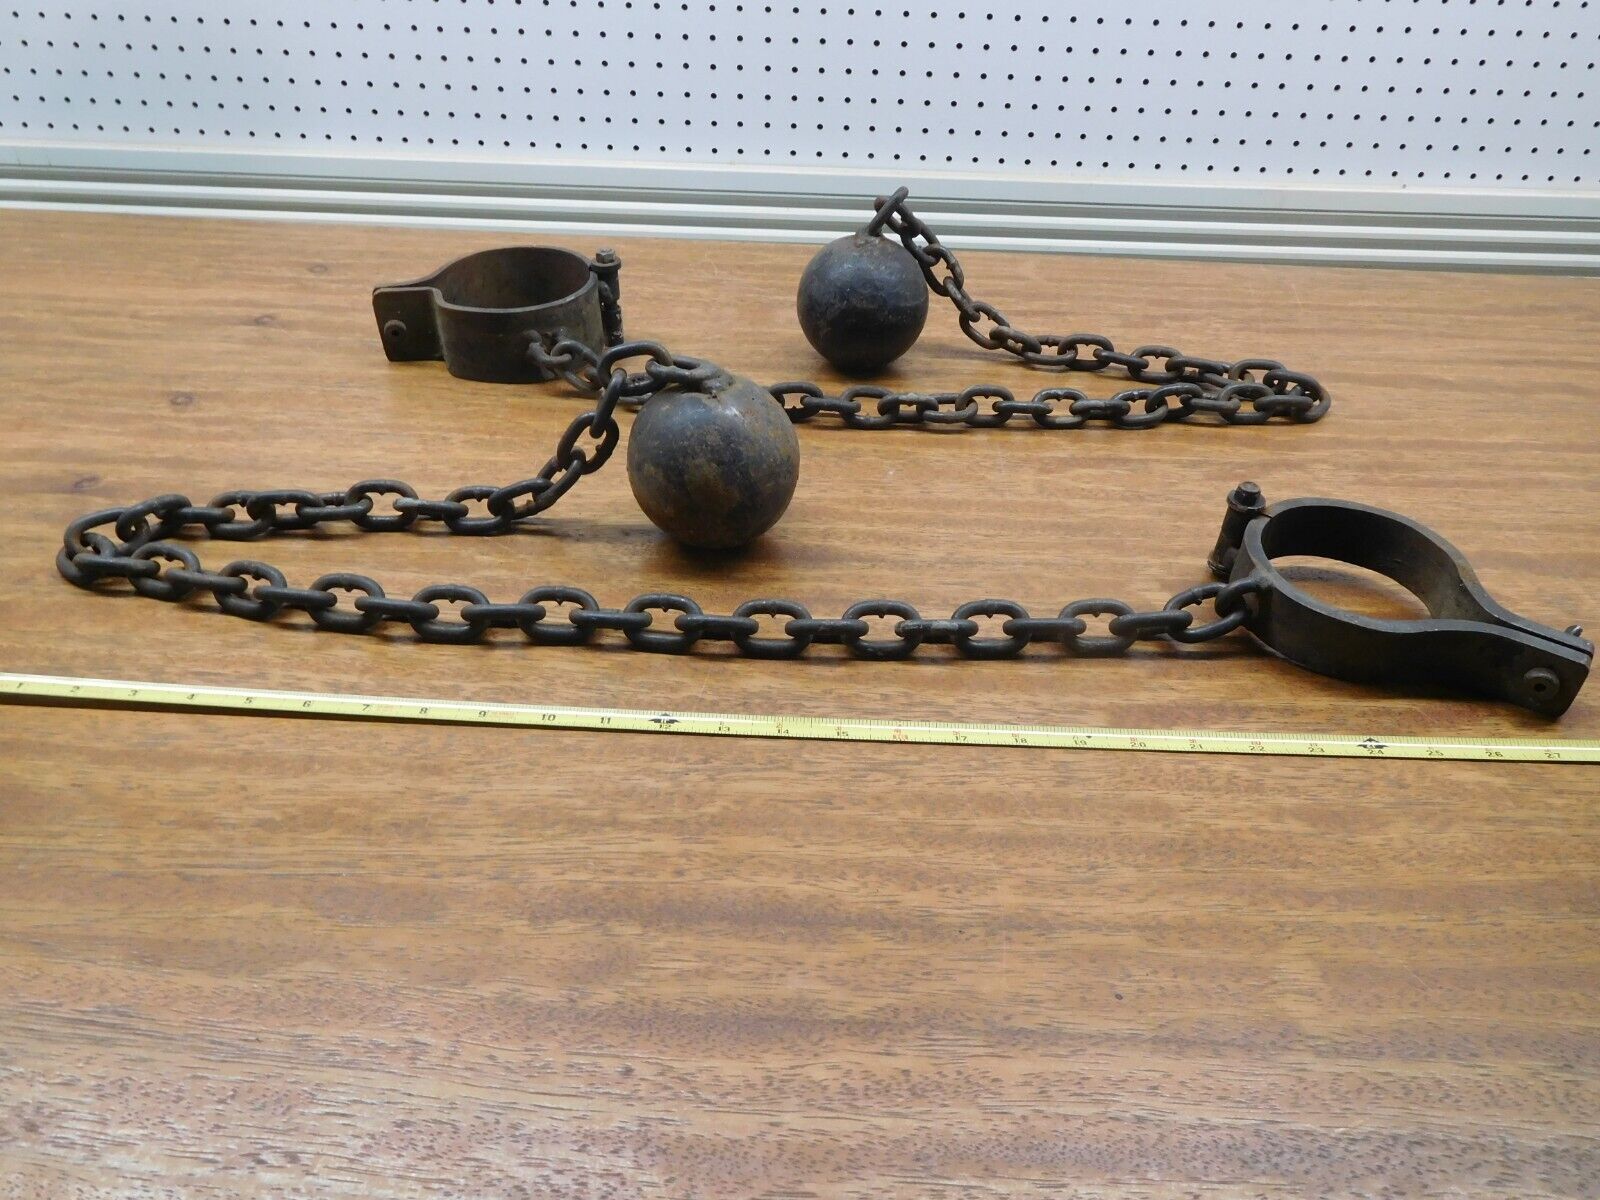 2 from Church Theatrical or Display former use Heavy Iron Ball, Chain,Shackle